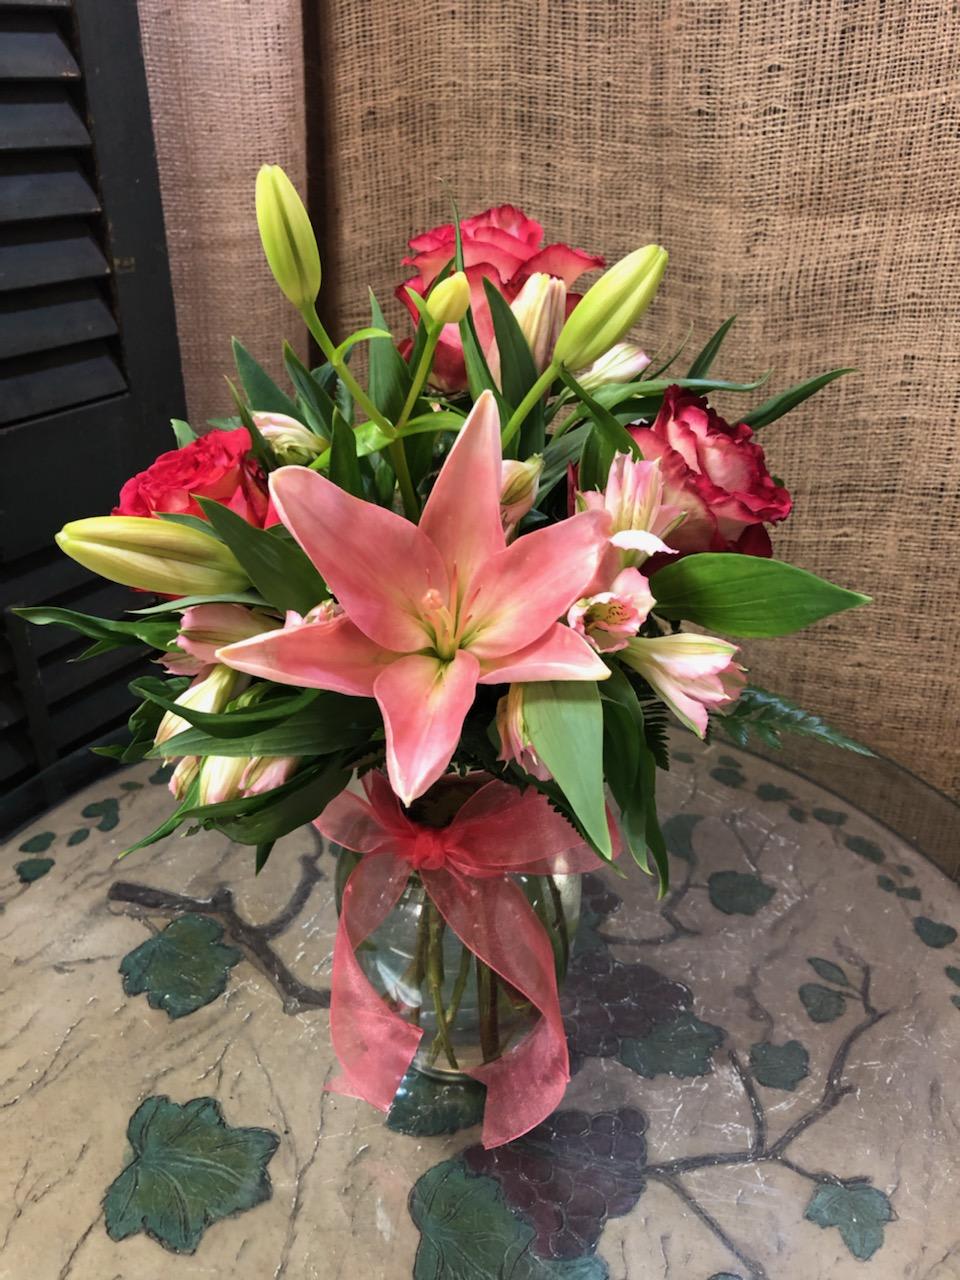 Roses, Lilies &amp; Alstromeria in a vase
- Remember our lilies arrive in